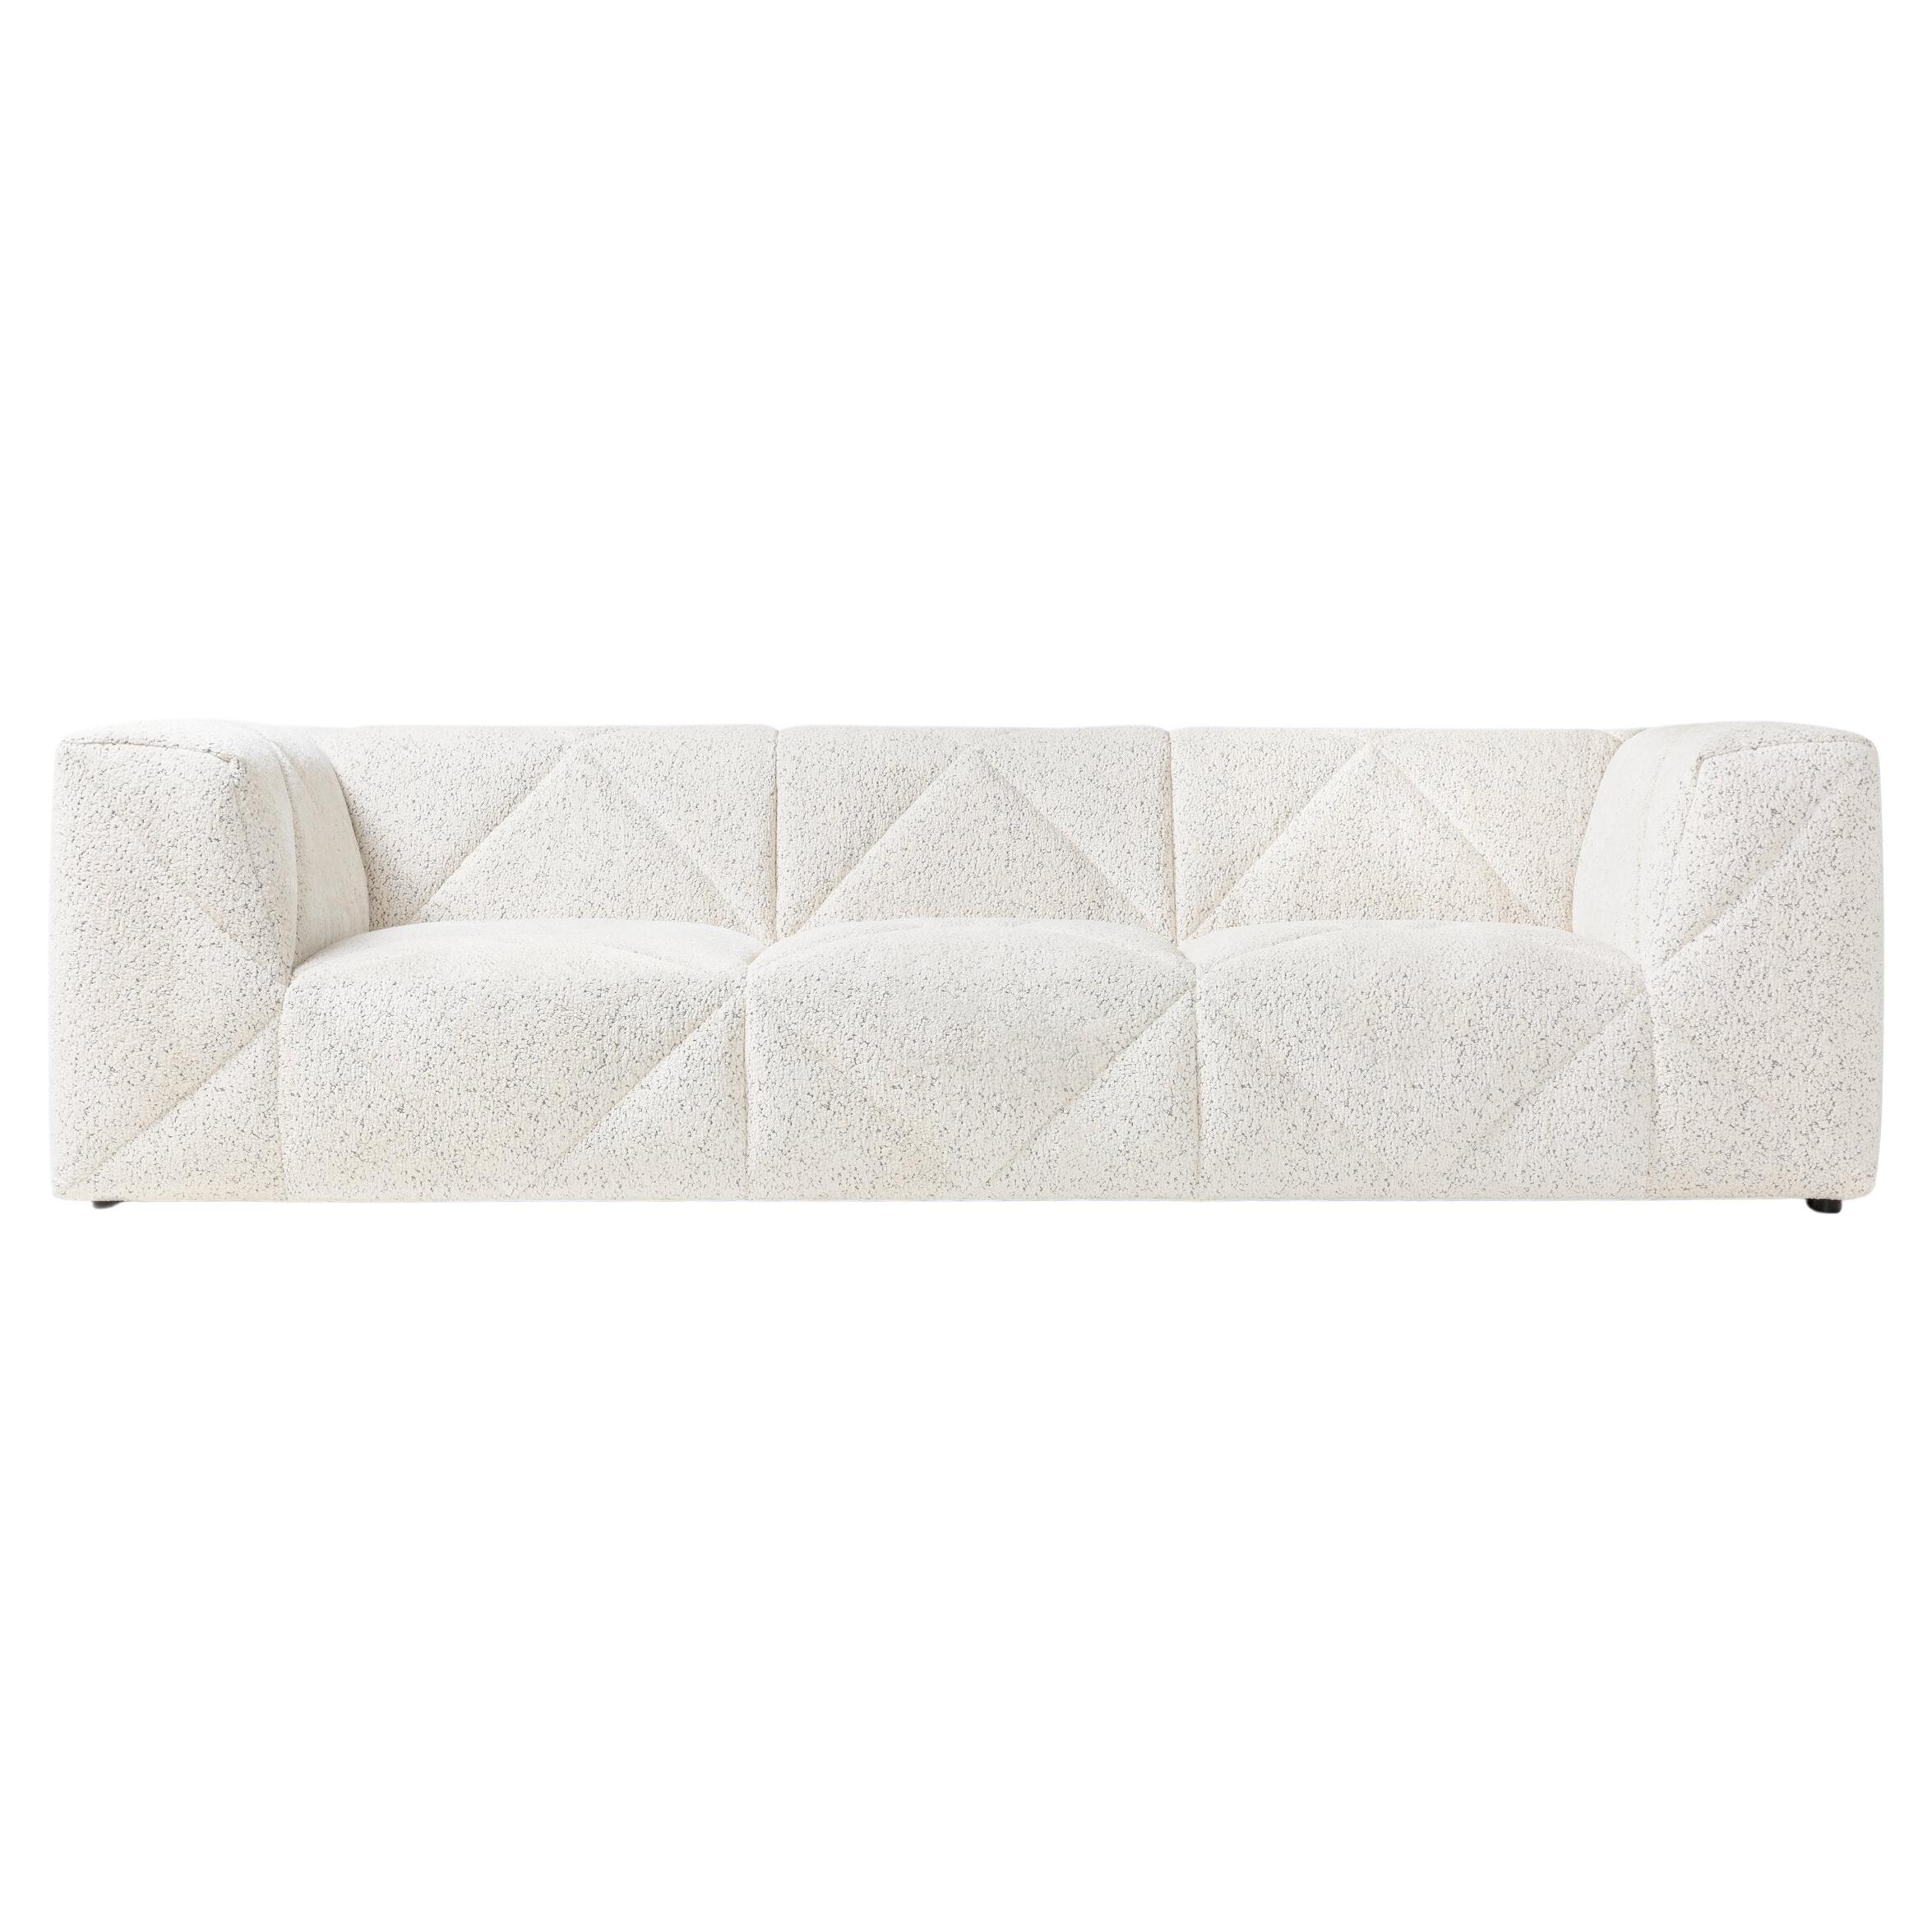 Moooi BFF Triple Seater Sofa in EA, Dodo Pavone Jacquard White Upholstery For Sale